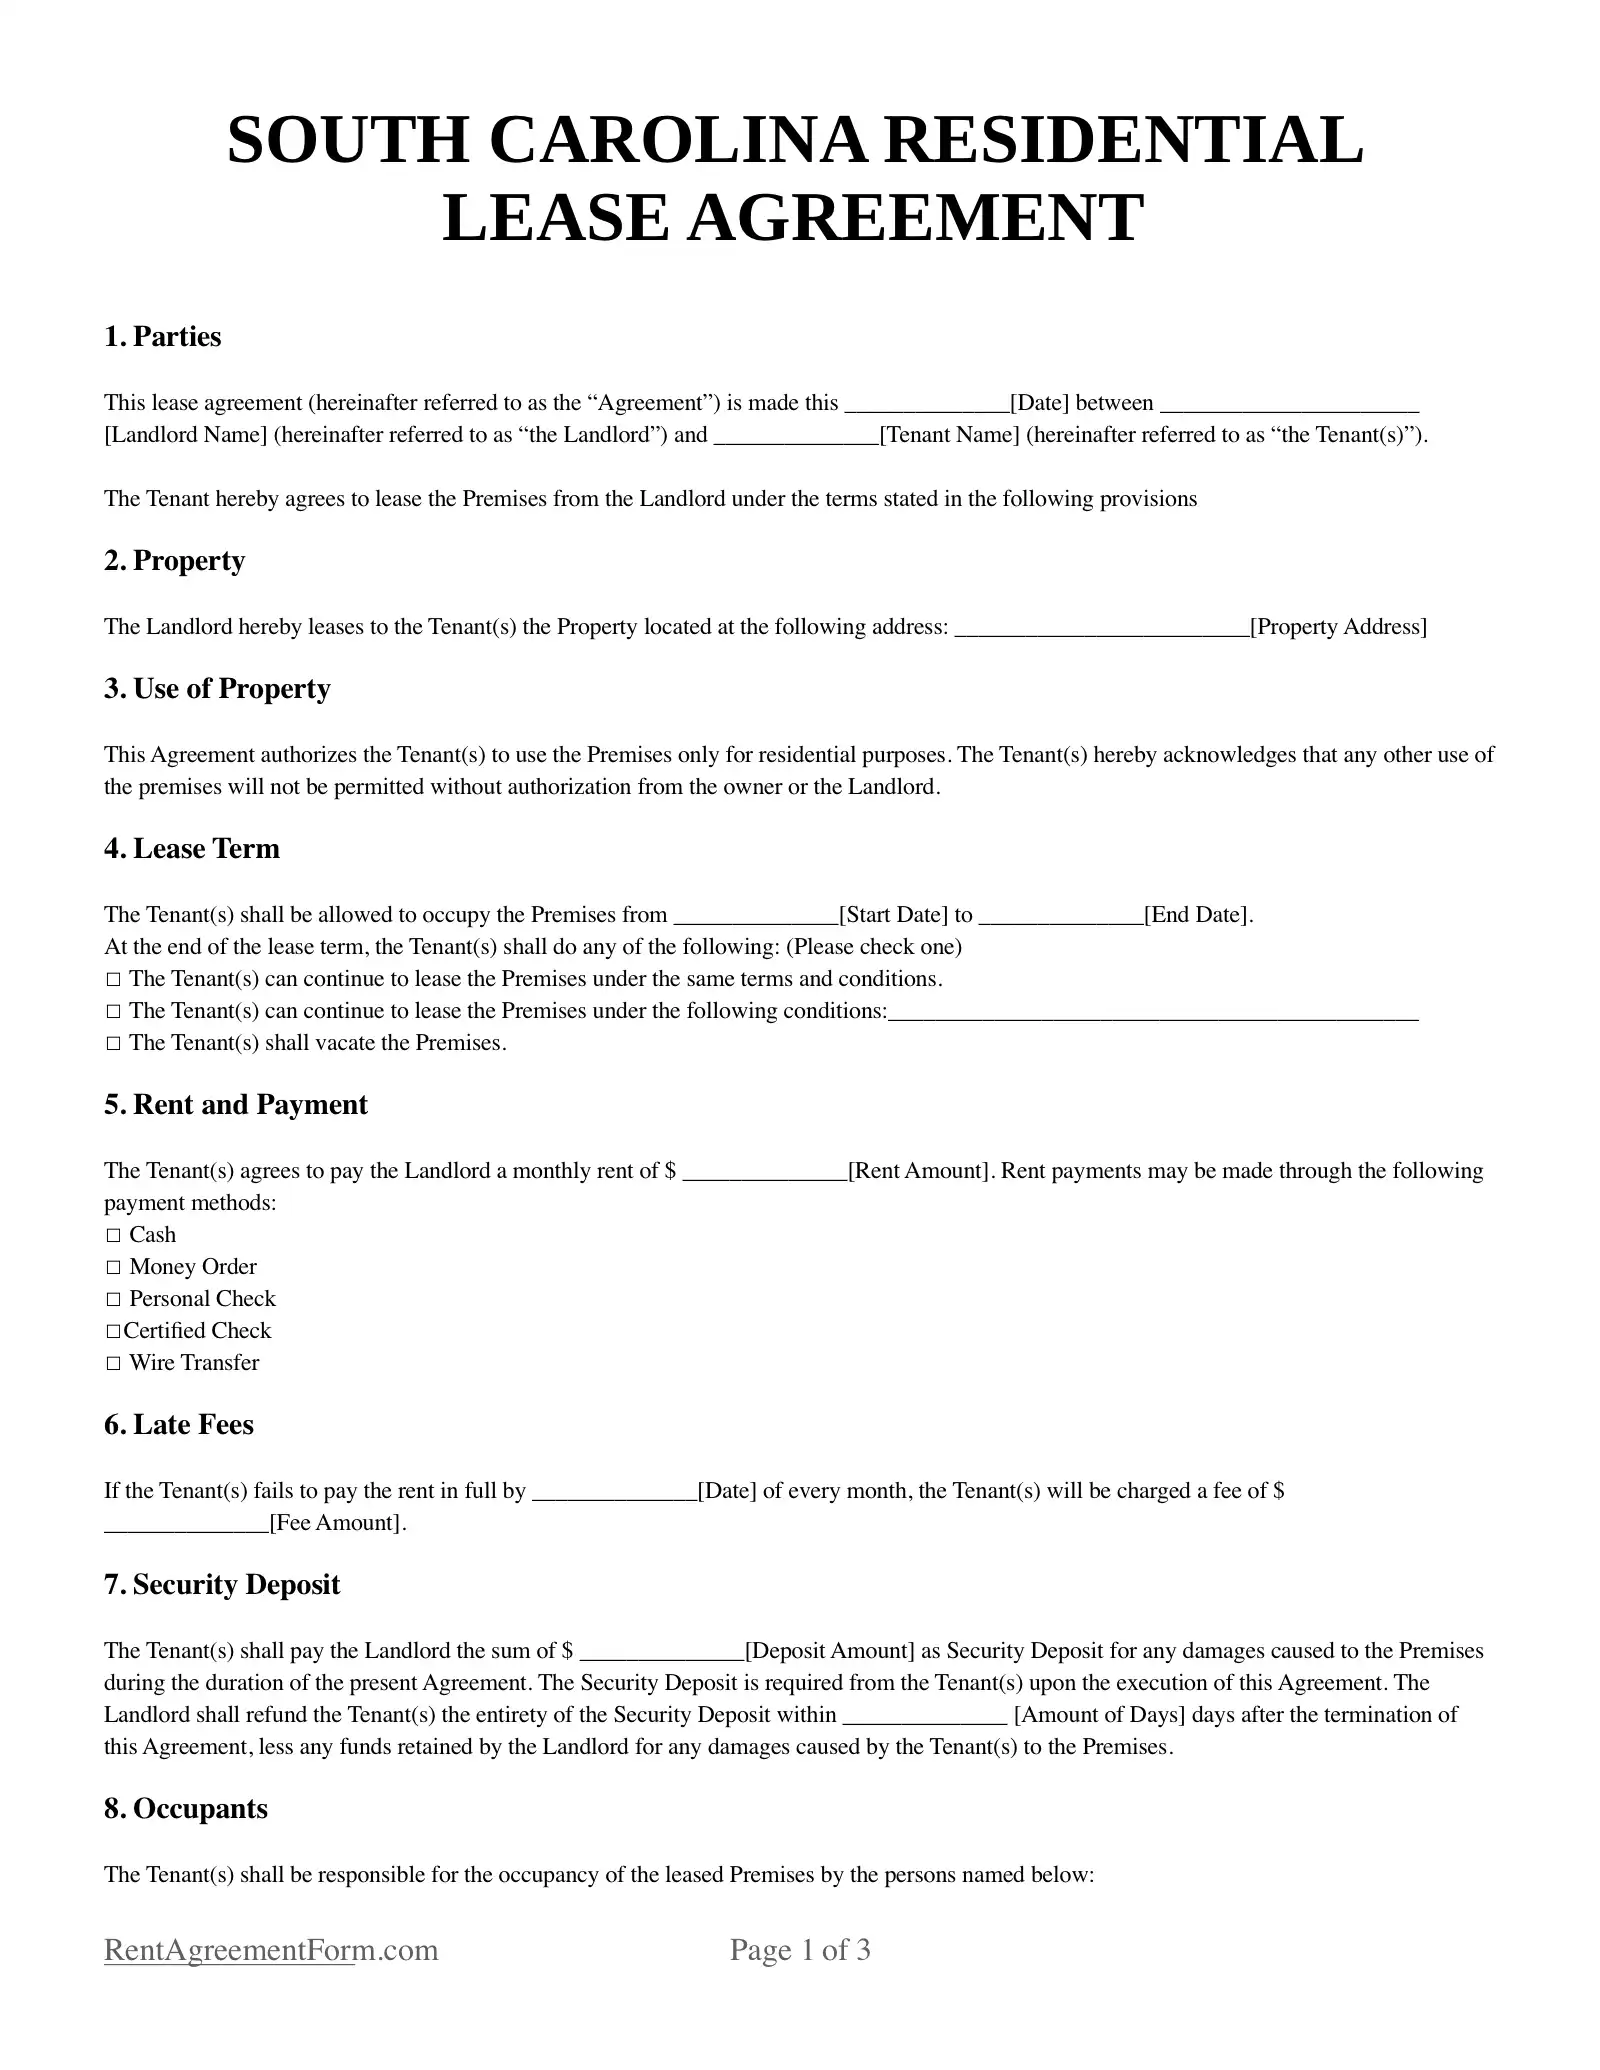 South Carolina Residential Lease Agreement Sample